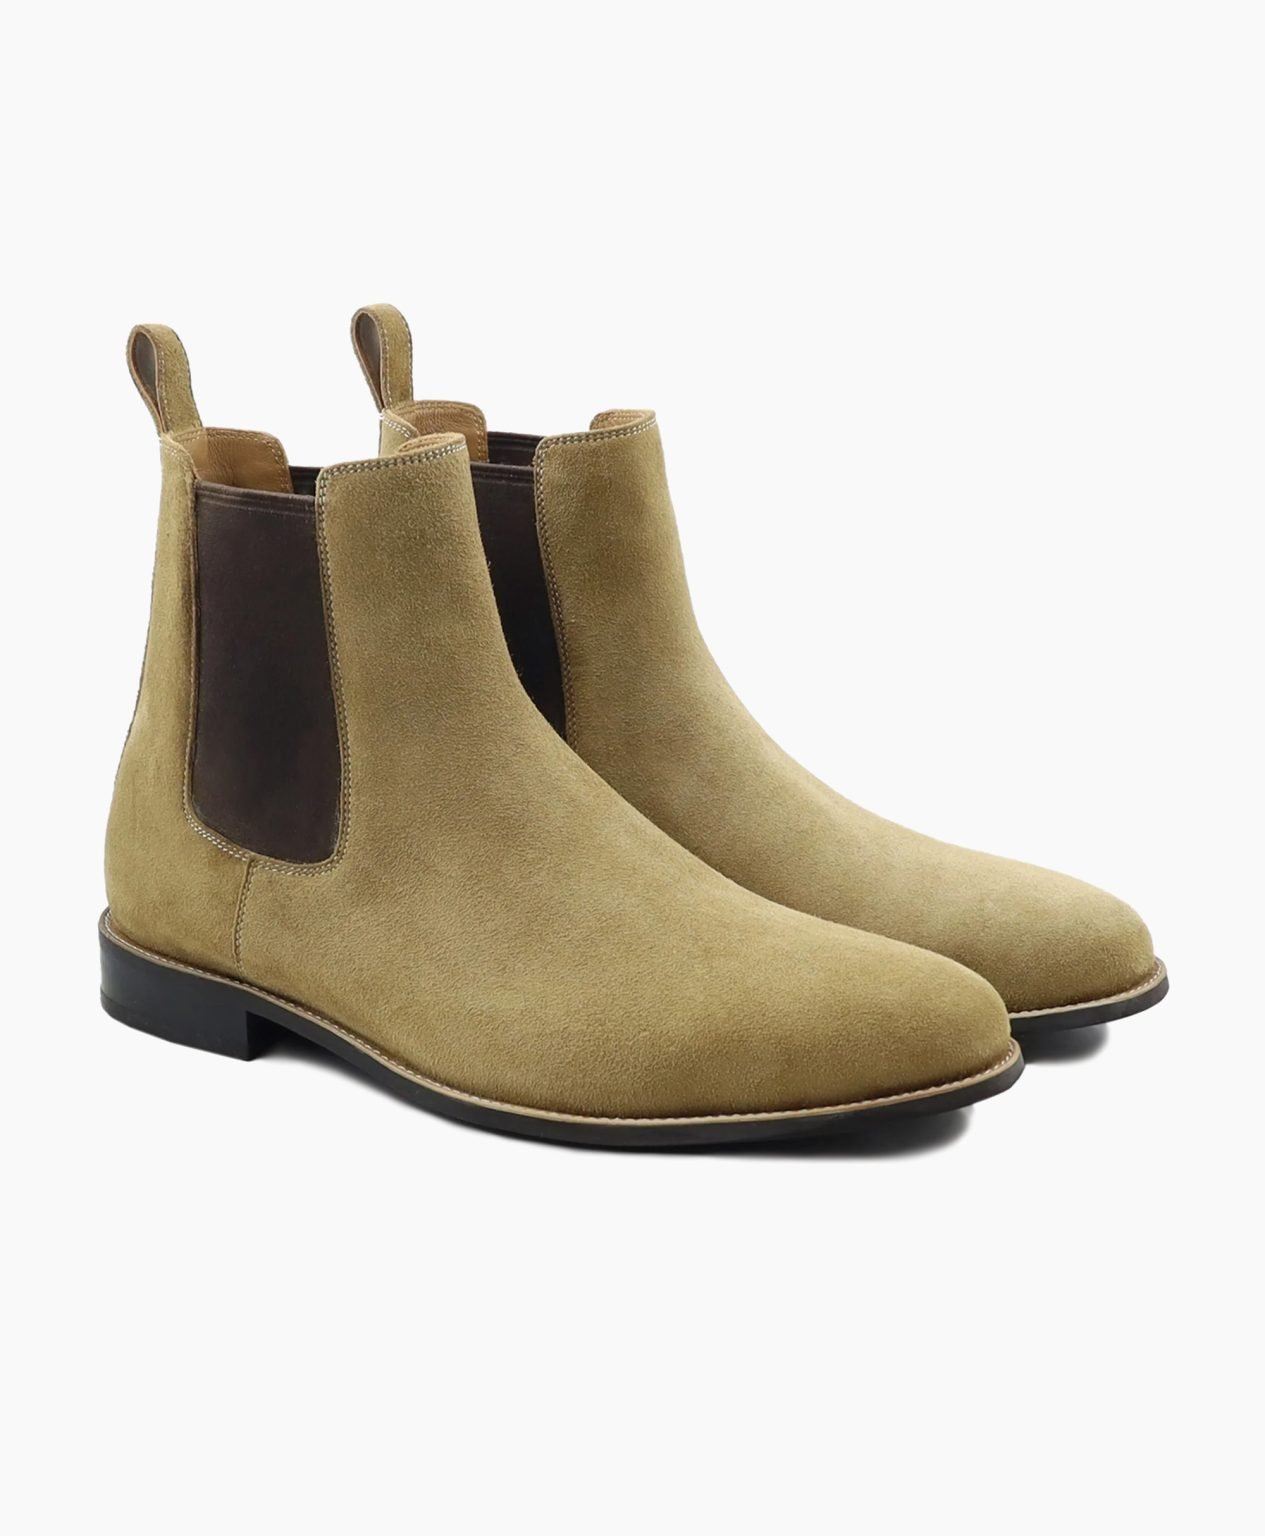 eden-chelsea-tan-suede-leather-boot-image200